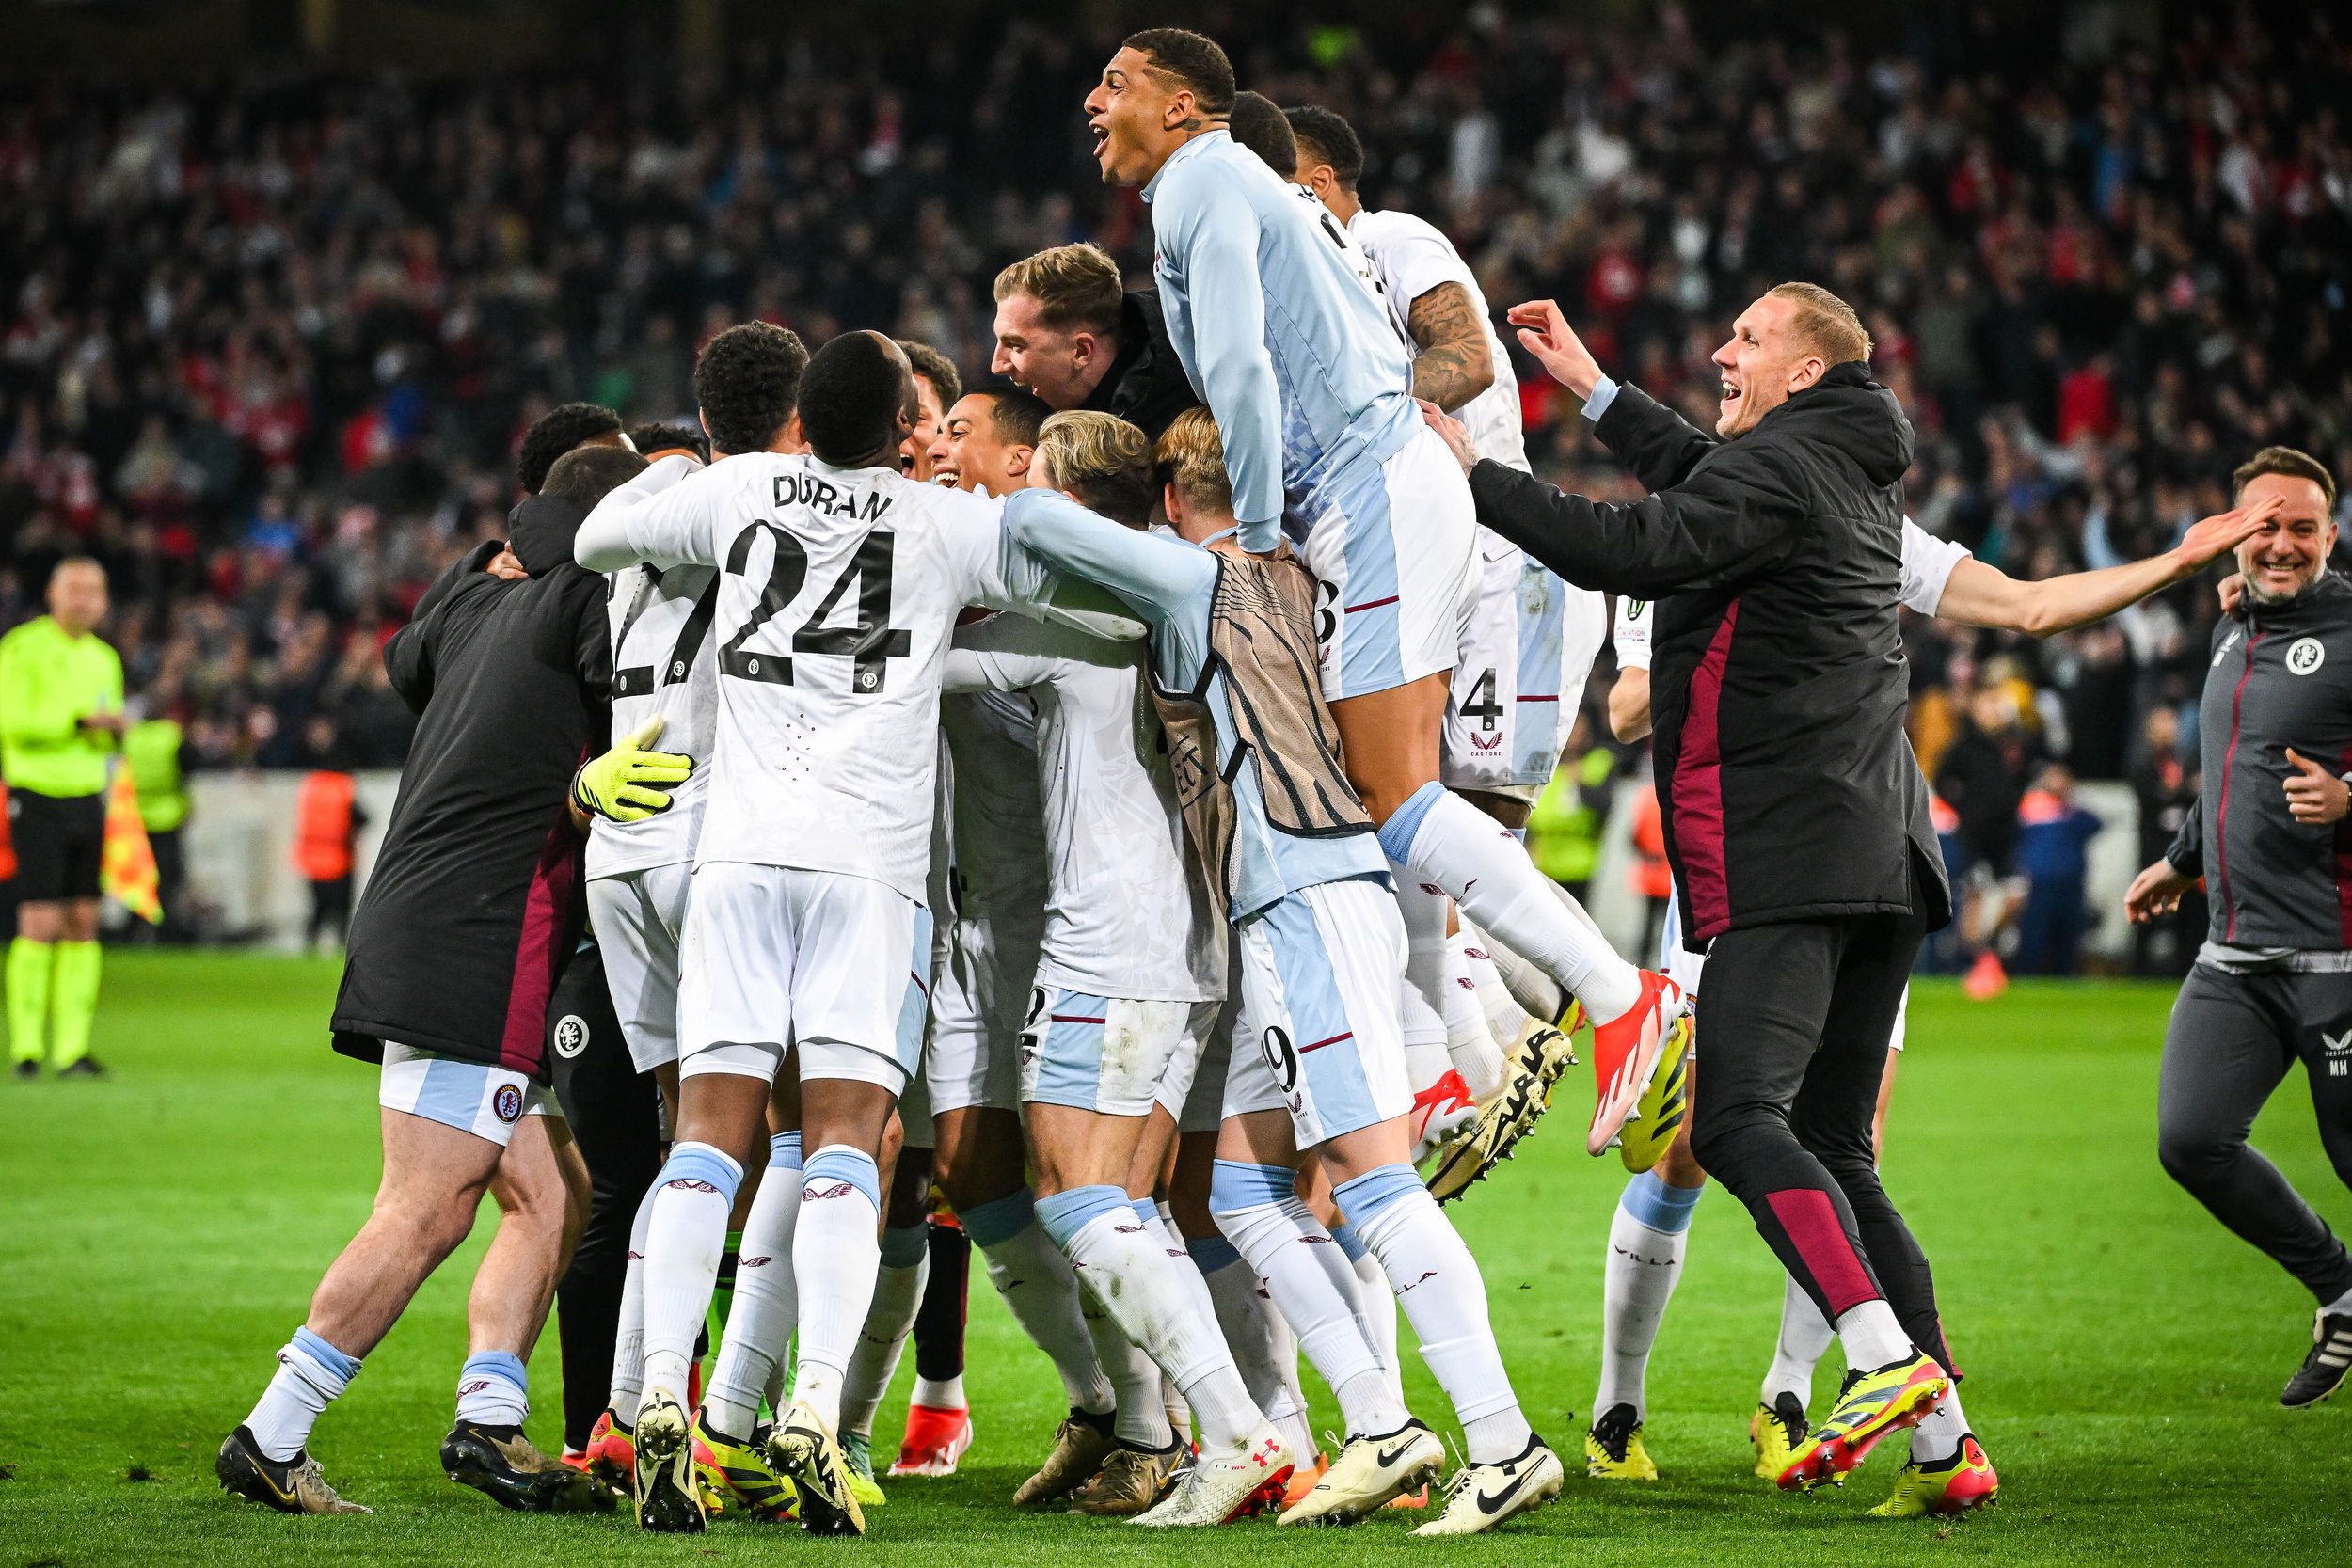 Aston Villa is England's only competitor in European competitions